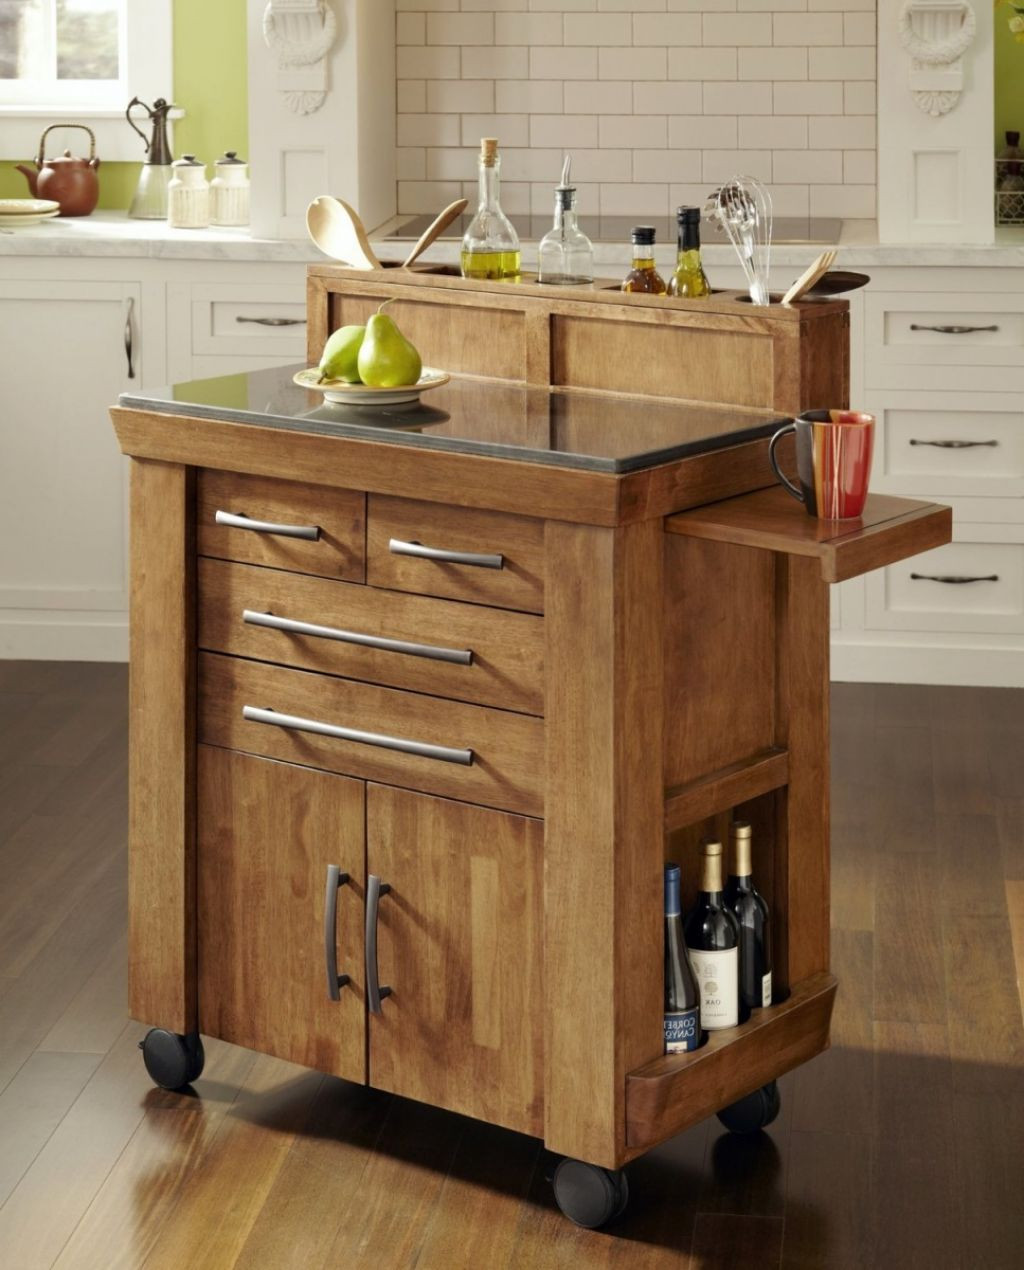 Small Portable Kitchen Island
 The Best Portable Kitchen Island with Seating MidCityEast